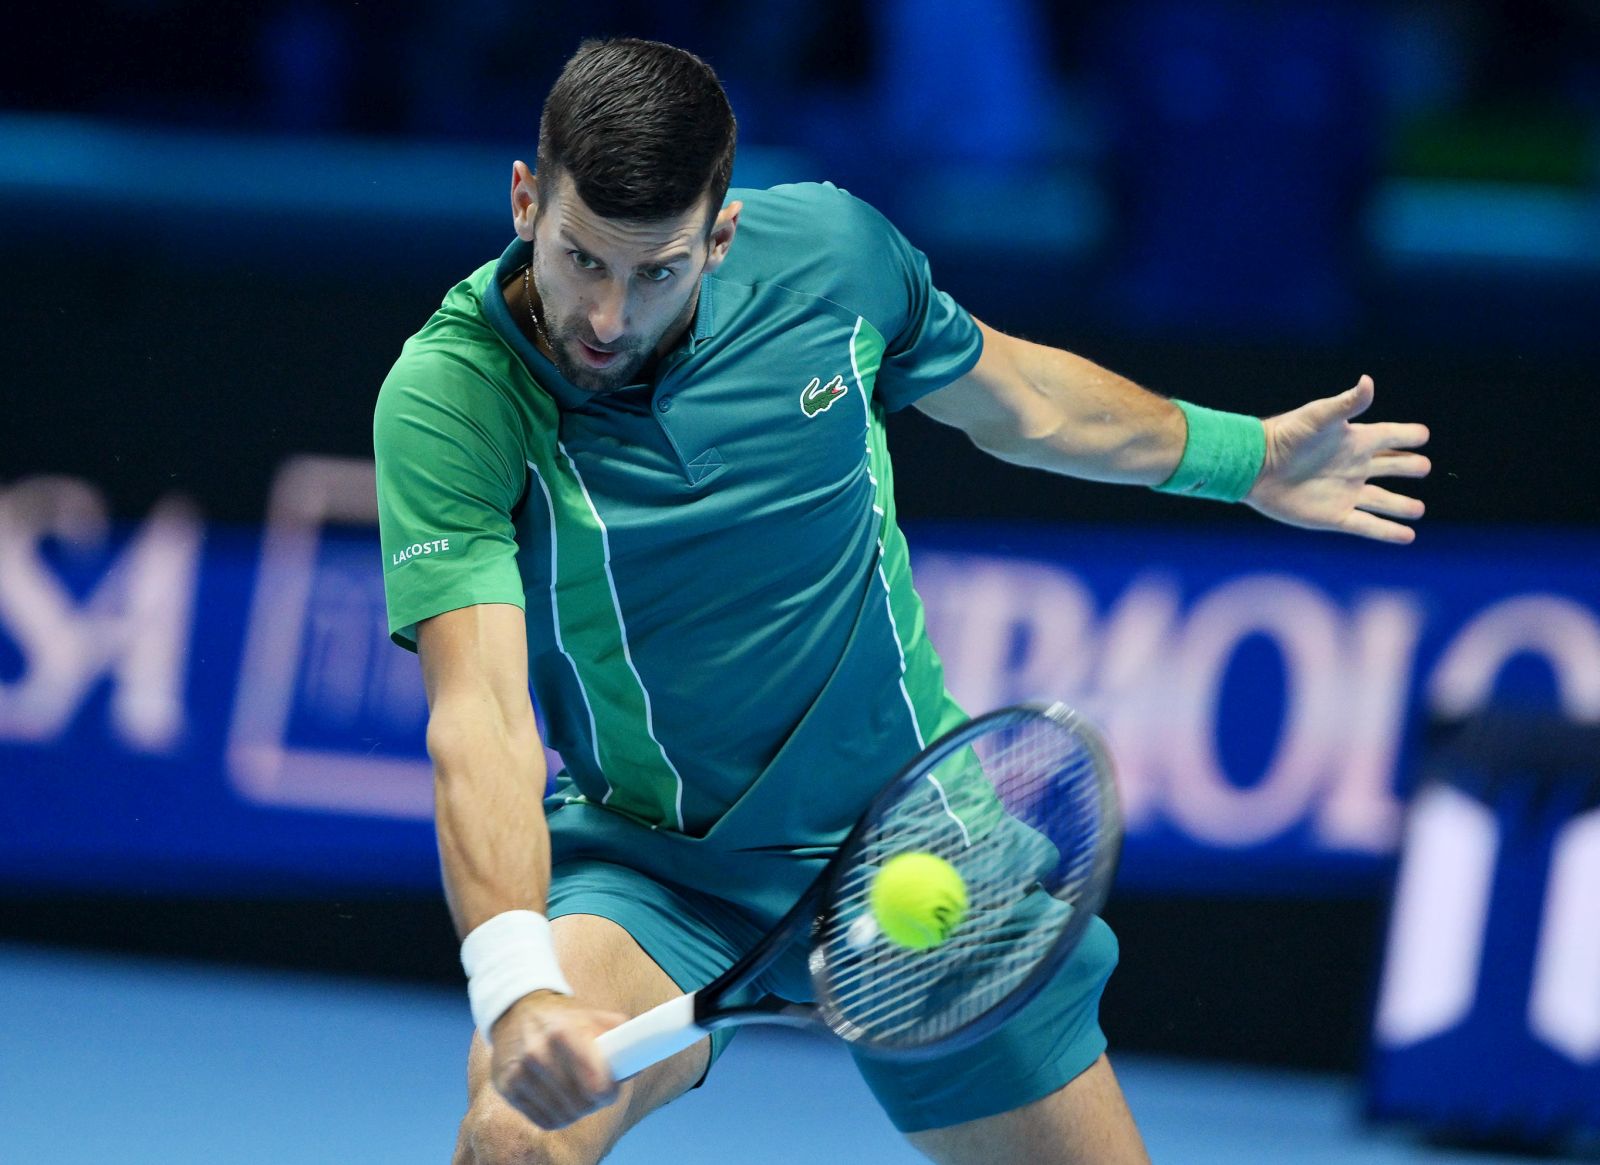 epa10972465 Novak Djokovic of Serbia in action during his singles match against Holger Rune of Denmark at the Nitto ATP Finals 2023 tennis tournament at the Pala Alpitour arena in Turin, Italy, 12 November 2023.  EPA/ALESSANDRO DI MARCO